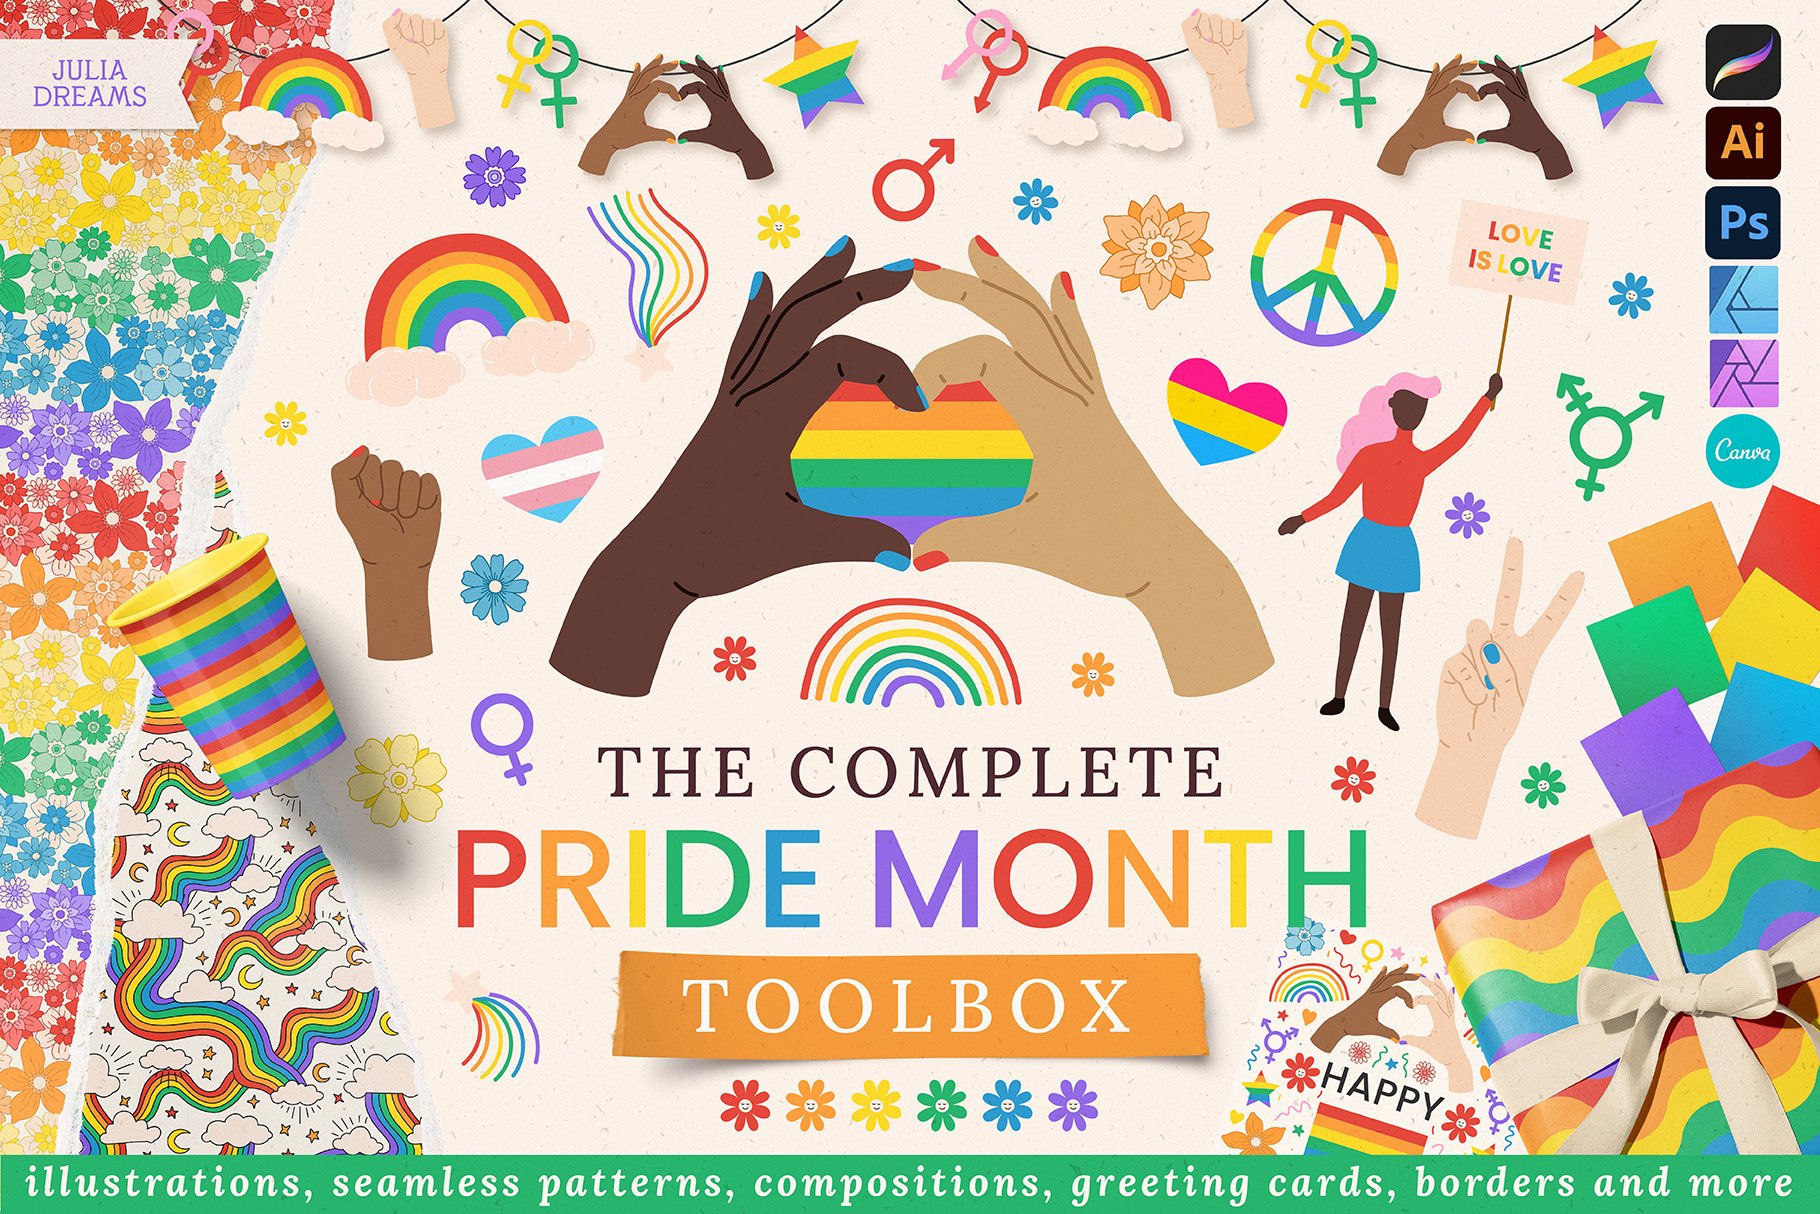 Pride Month Toolbox cover image.